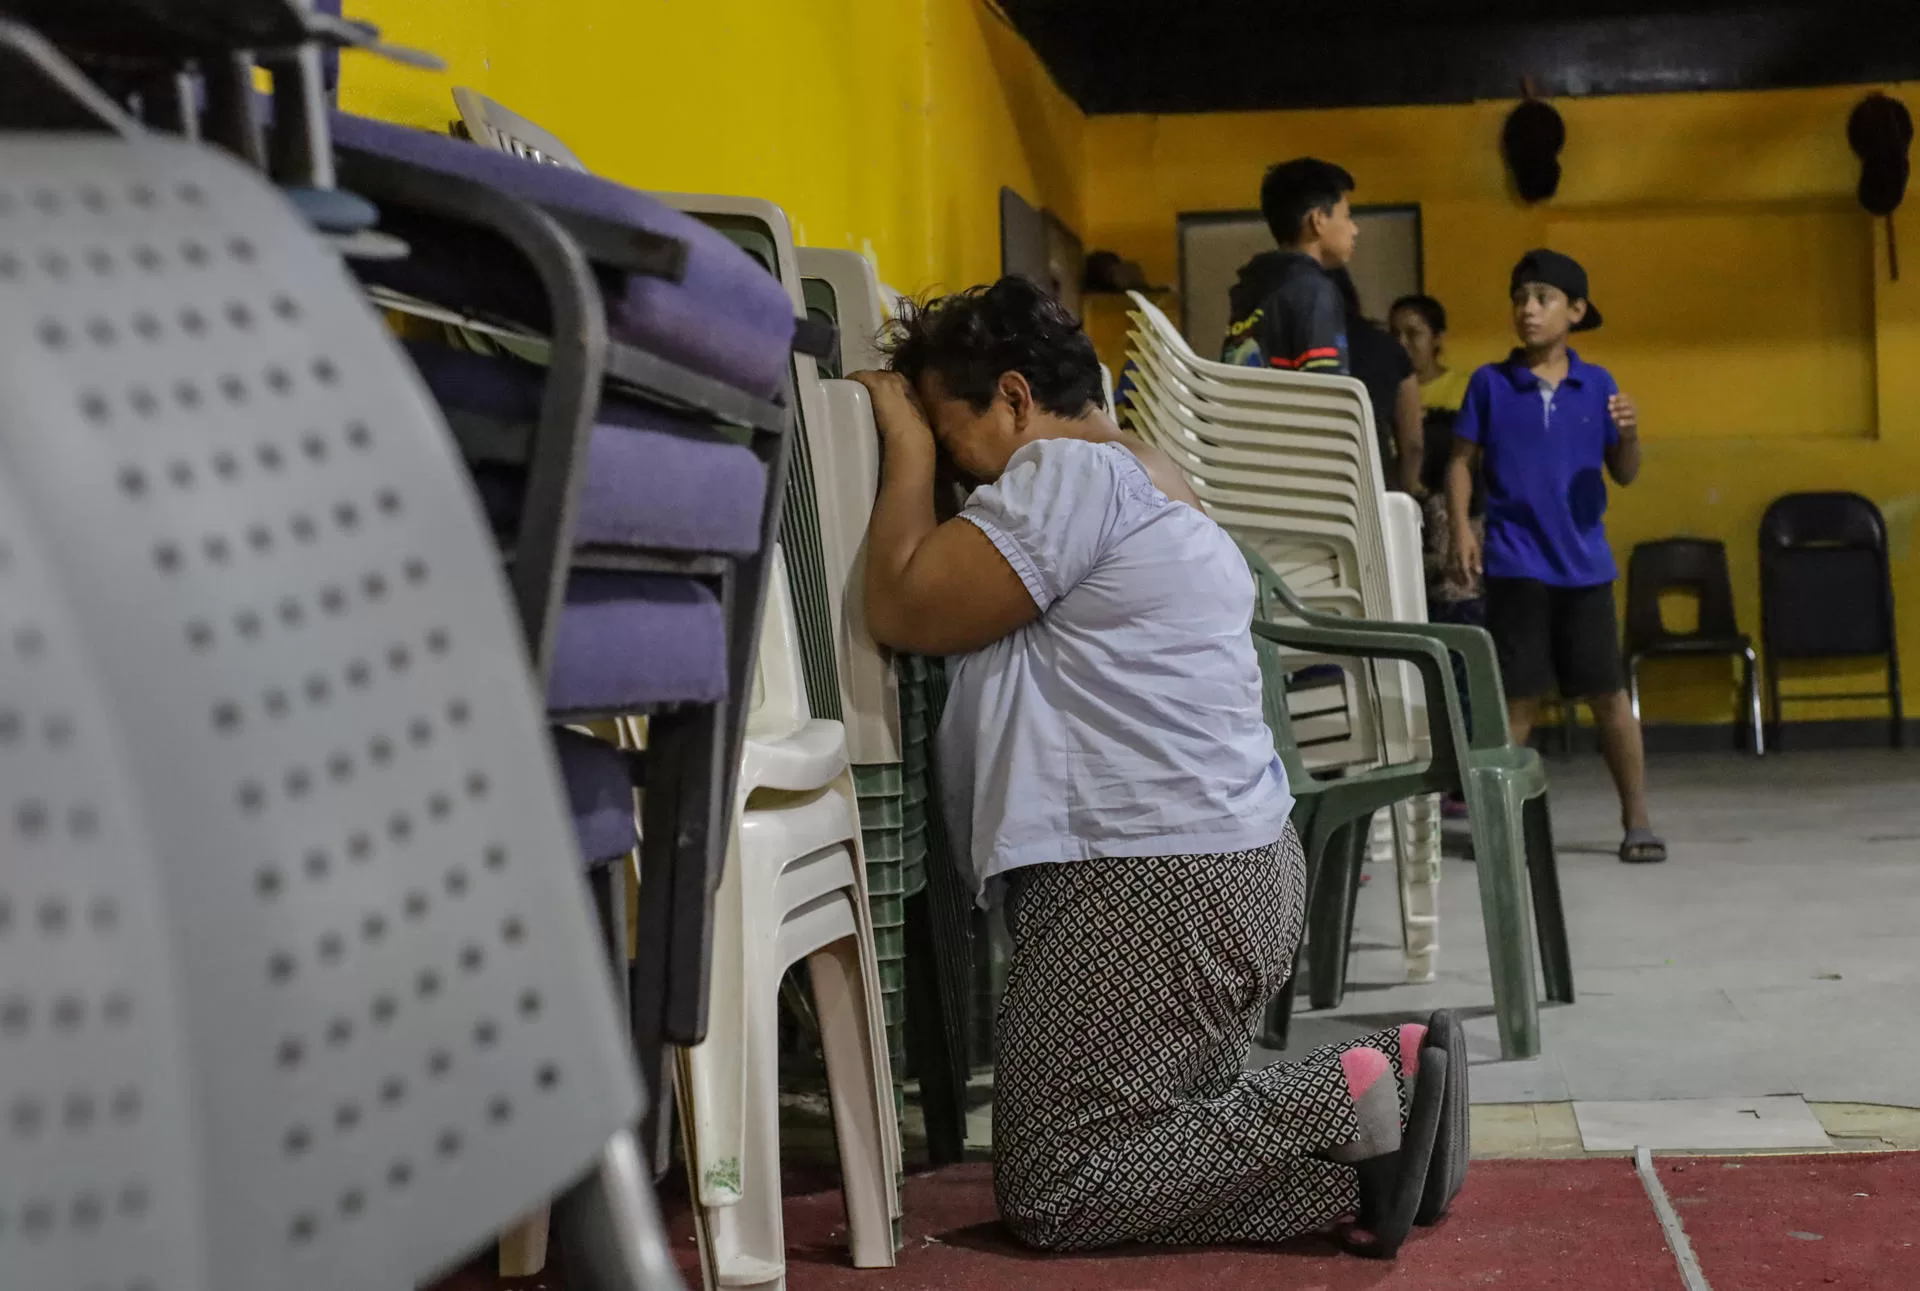 Migrants begin indefinite fasting in northern Mexico to request asylum appointments in the US.
